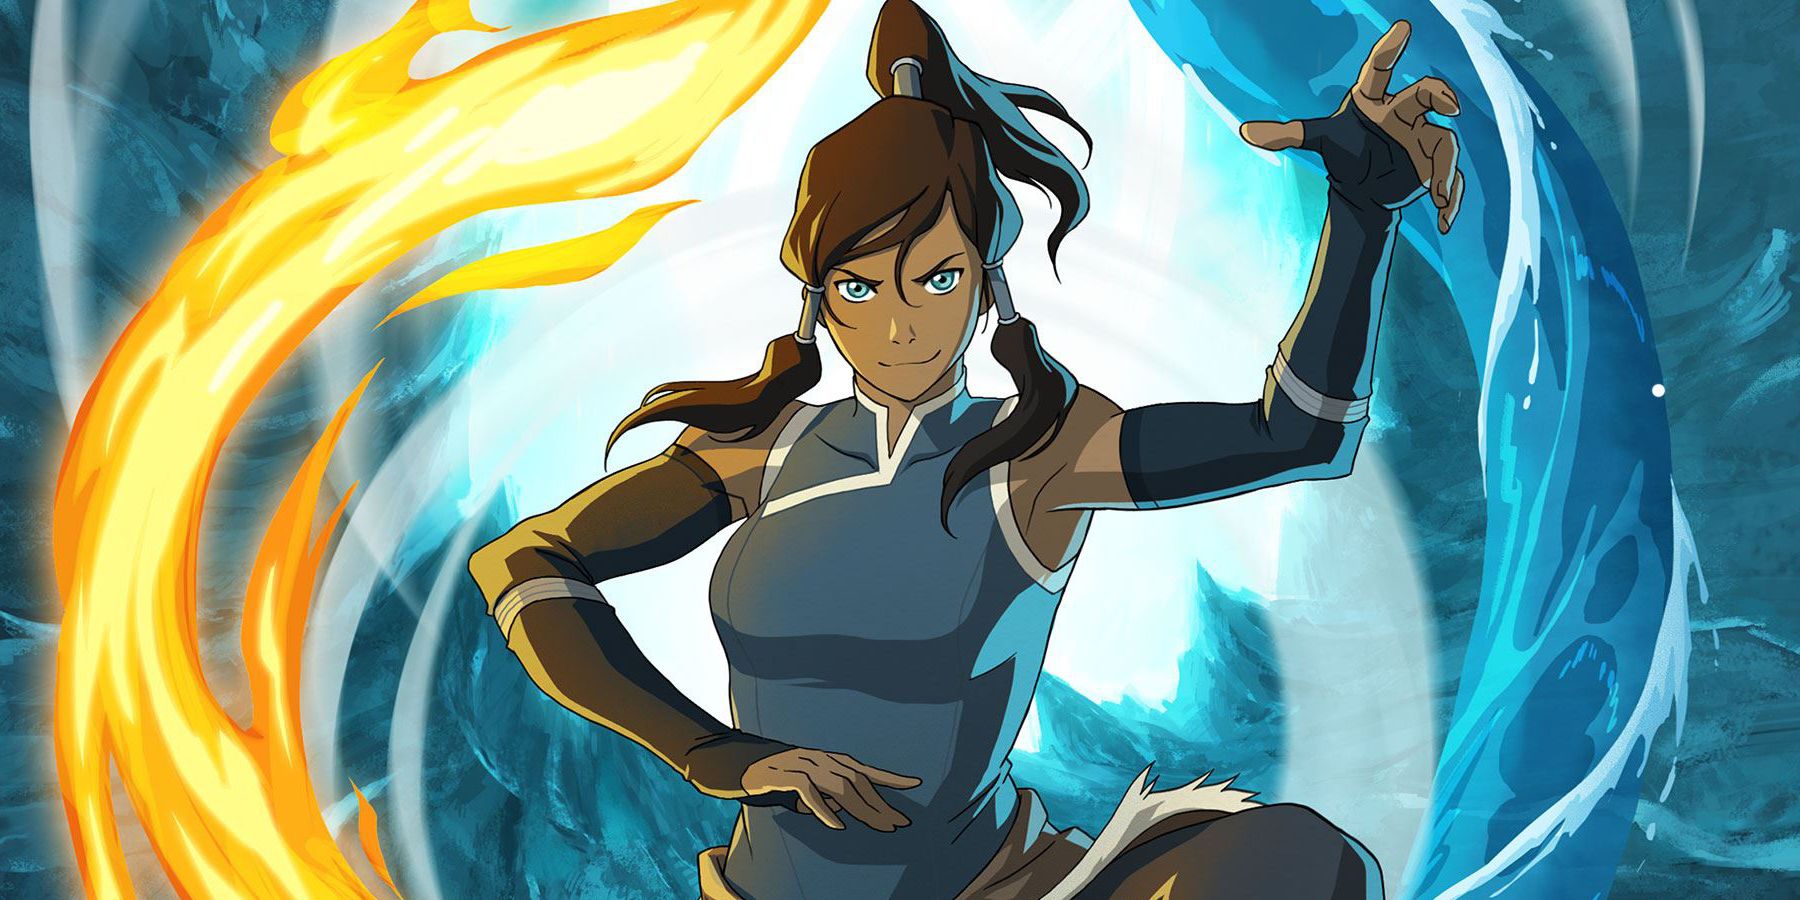 Pin on The Legend of Korra / Avatar the Last Airbender